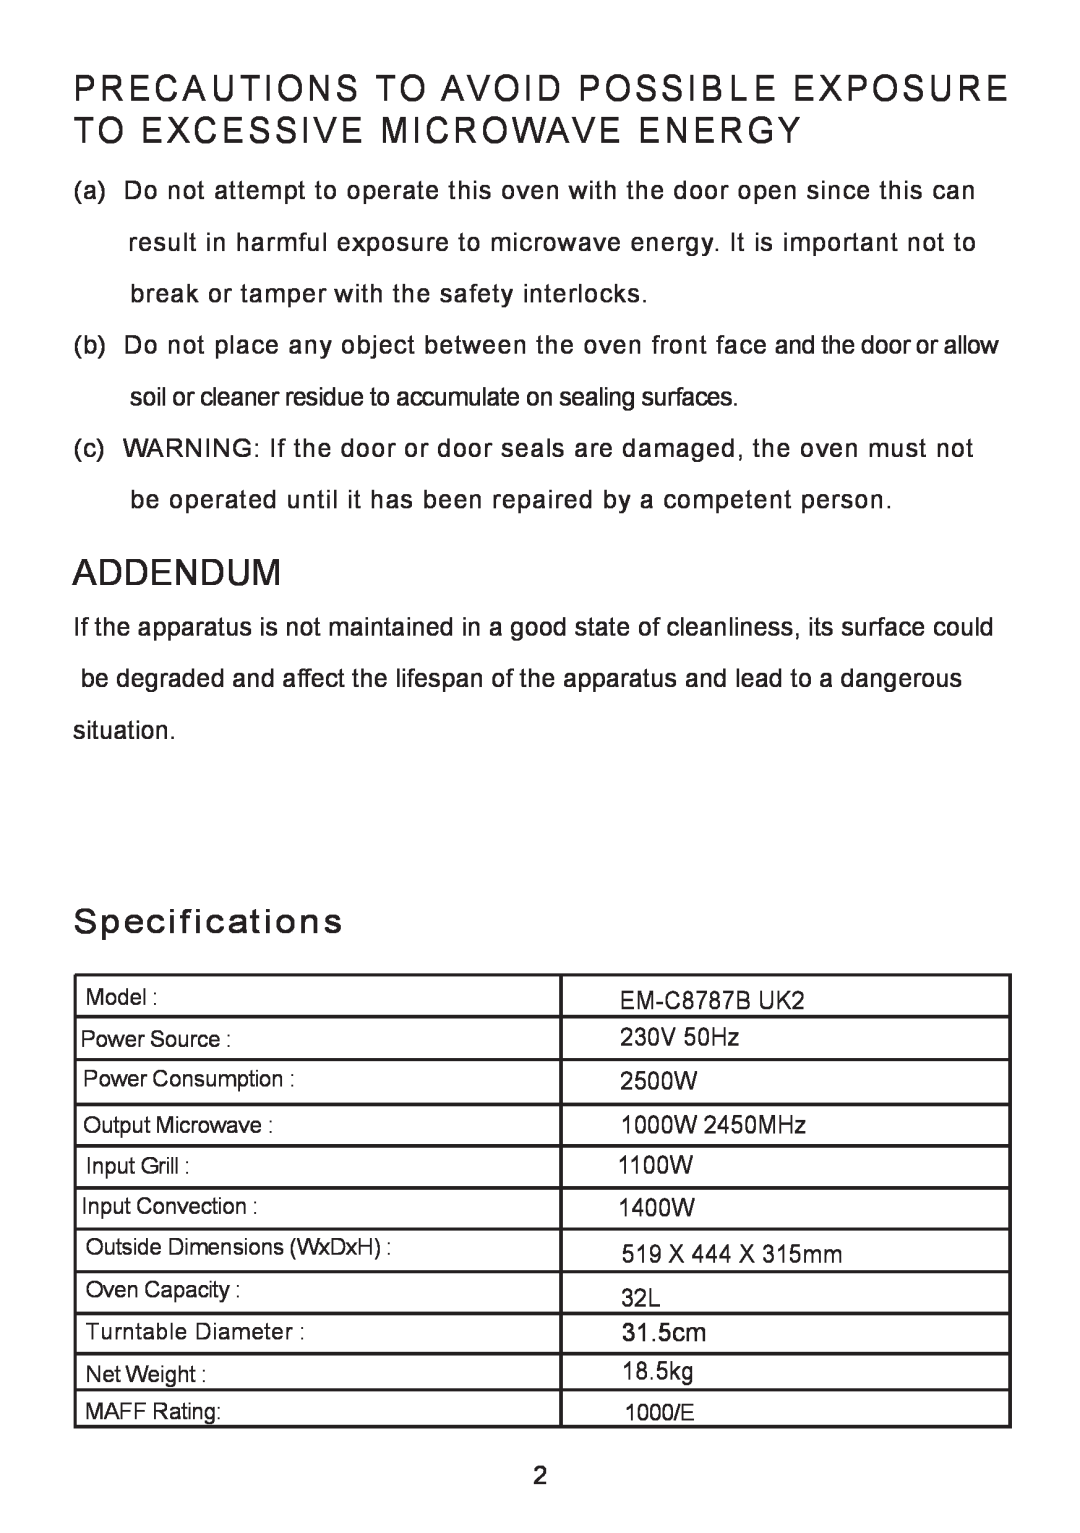 Sanyo em-c887B, UK2 Precautions To Avoid Possible Exposure To Excessive Microwave Energy, Addendum, Specifications 